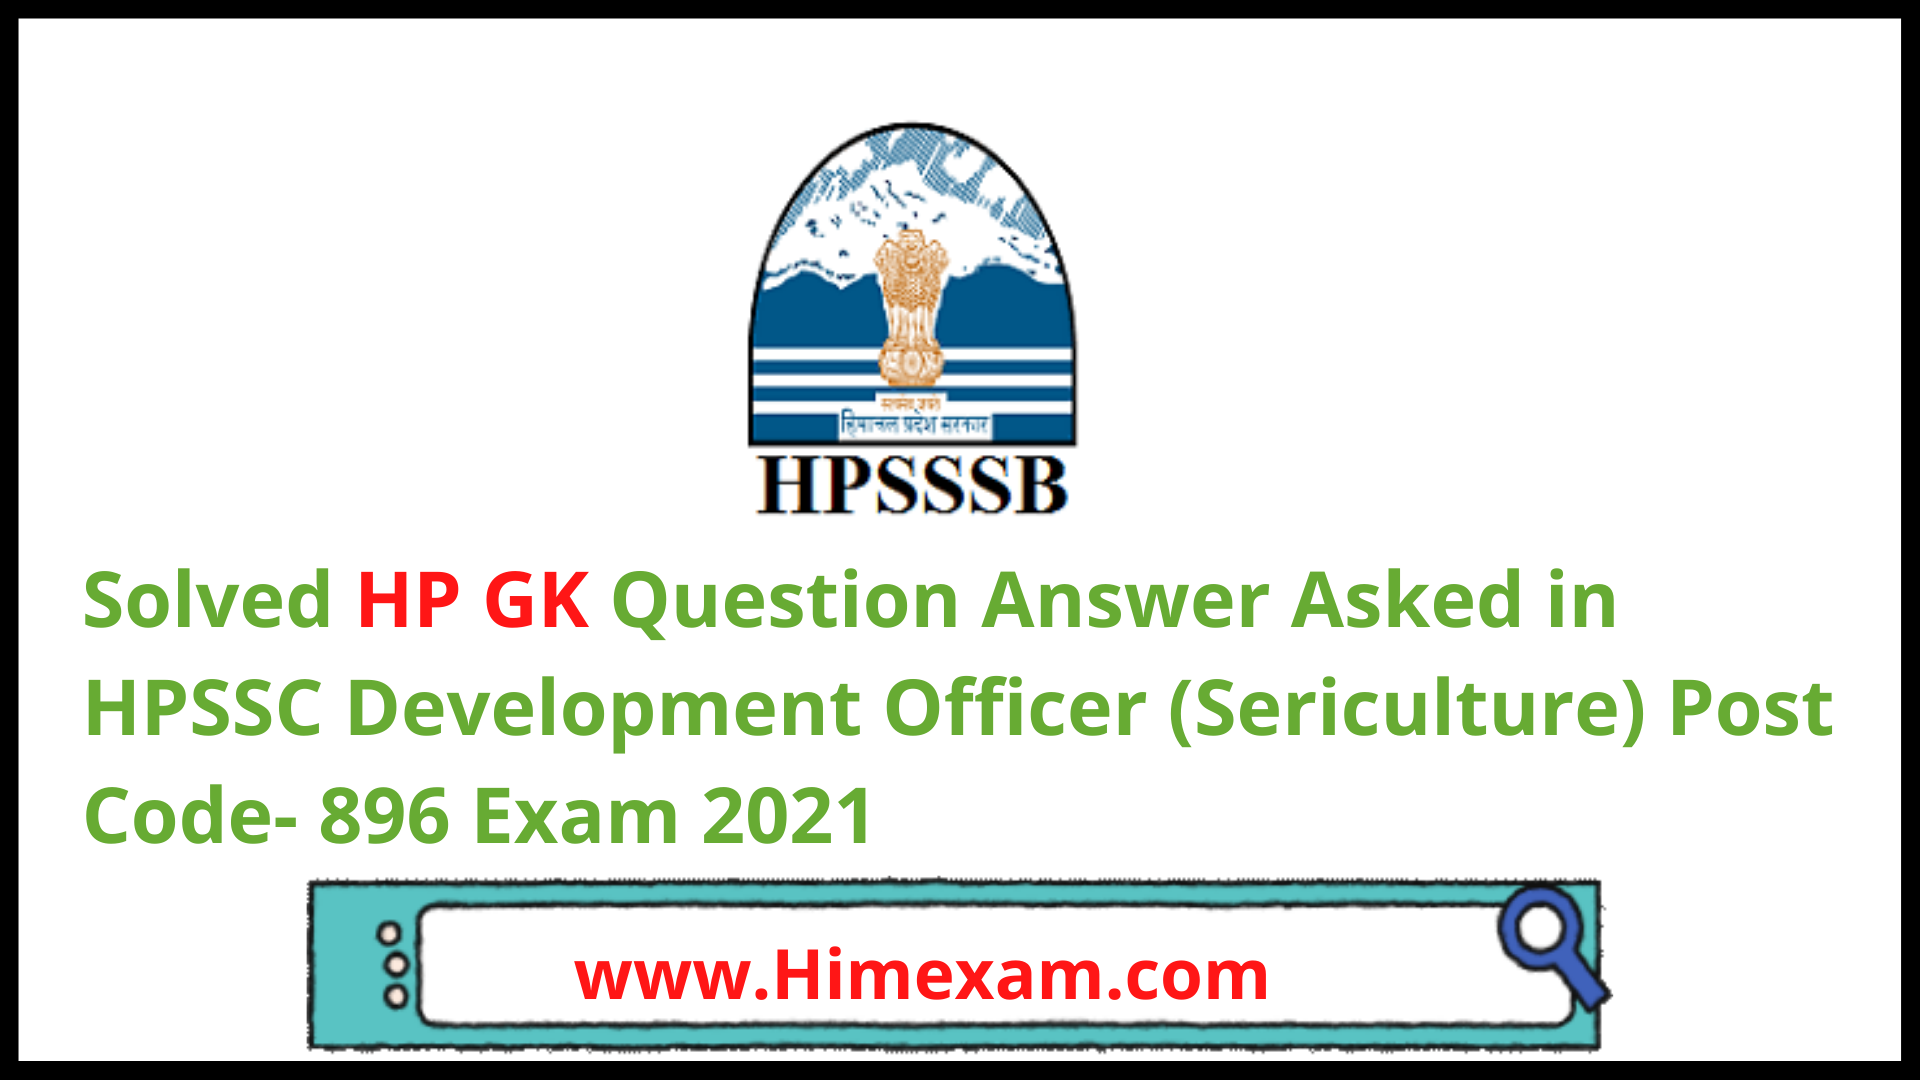 Solved HP GK Question Answer Asked in HPSSC Development Officer (Sericulture) Post Code- 896 Exam 2021